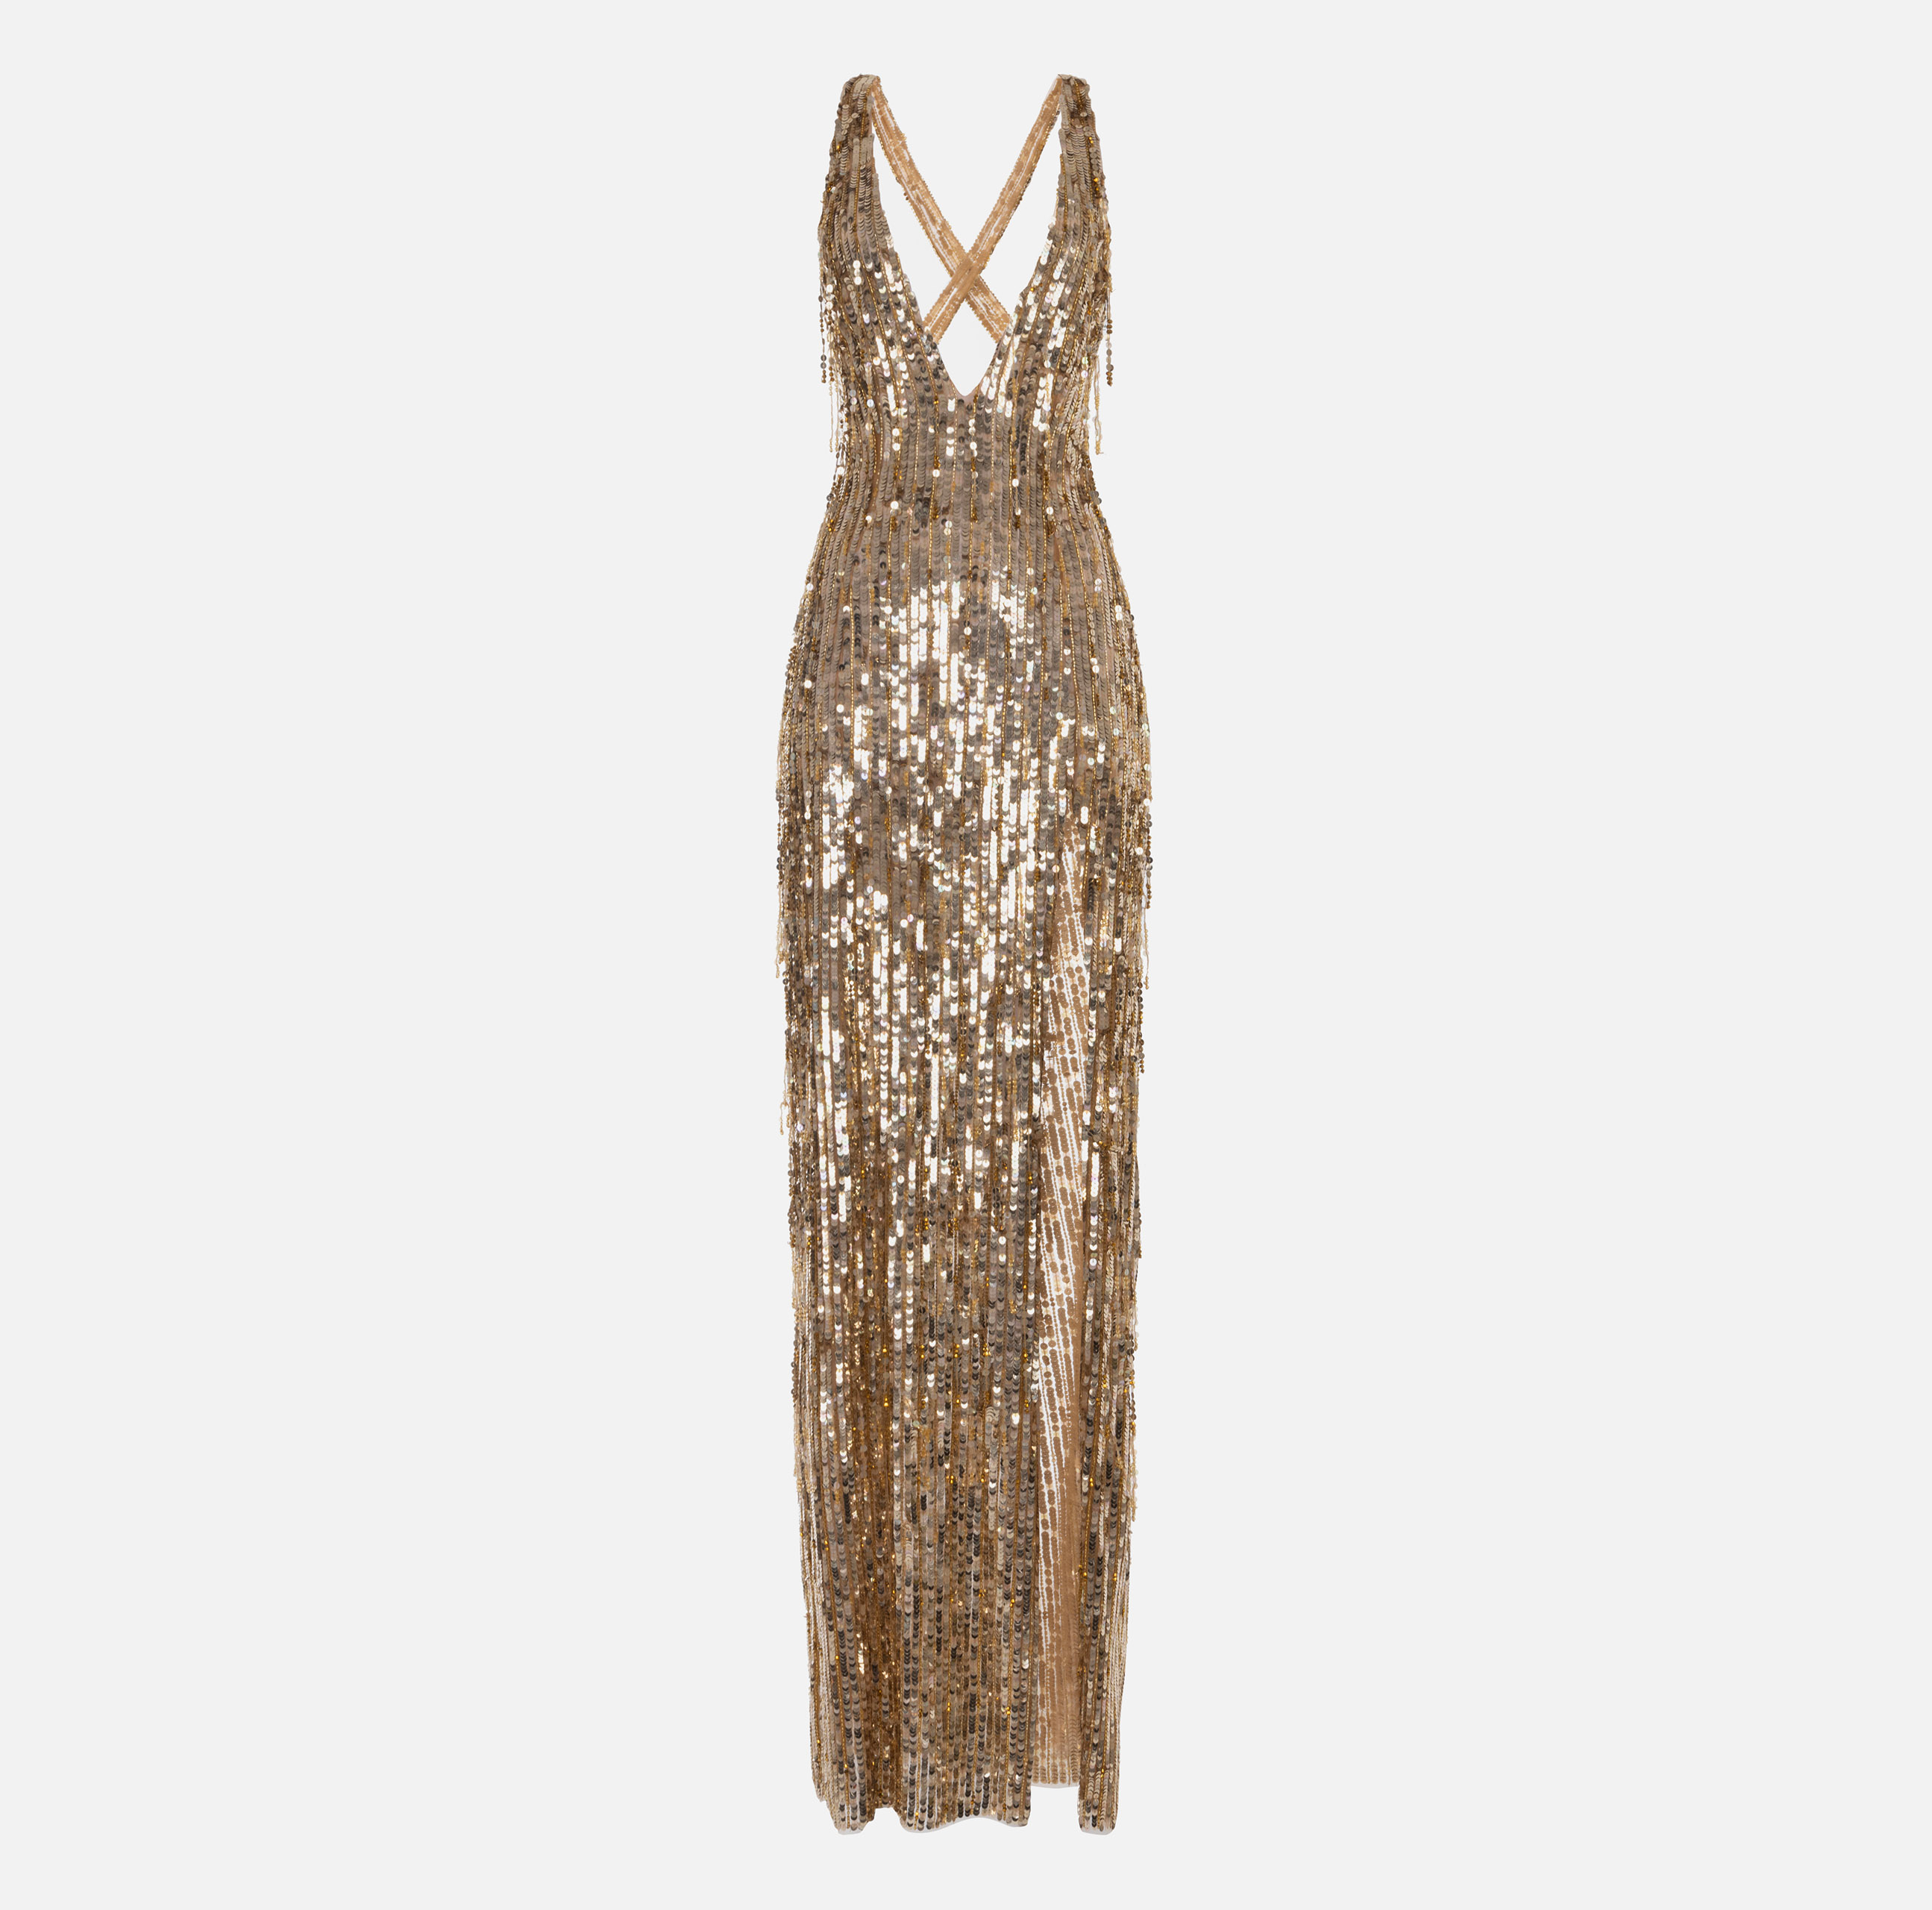 Red carpet dress with fringes made of beads and sequins - ABBIGLIAMENTO - Elisabetta Franchi